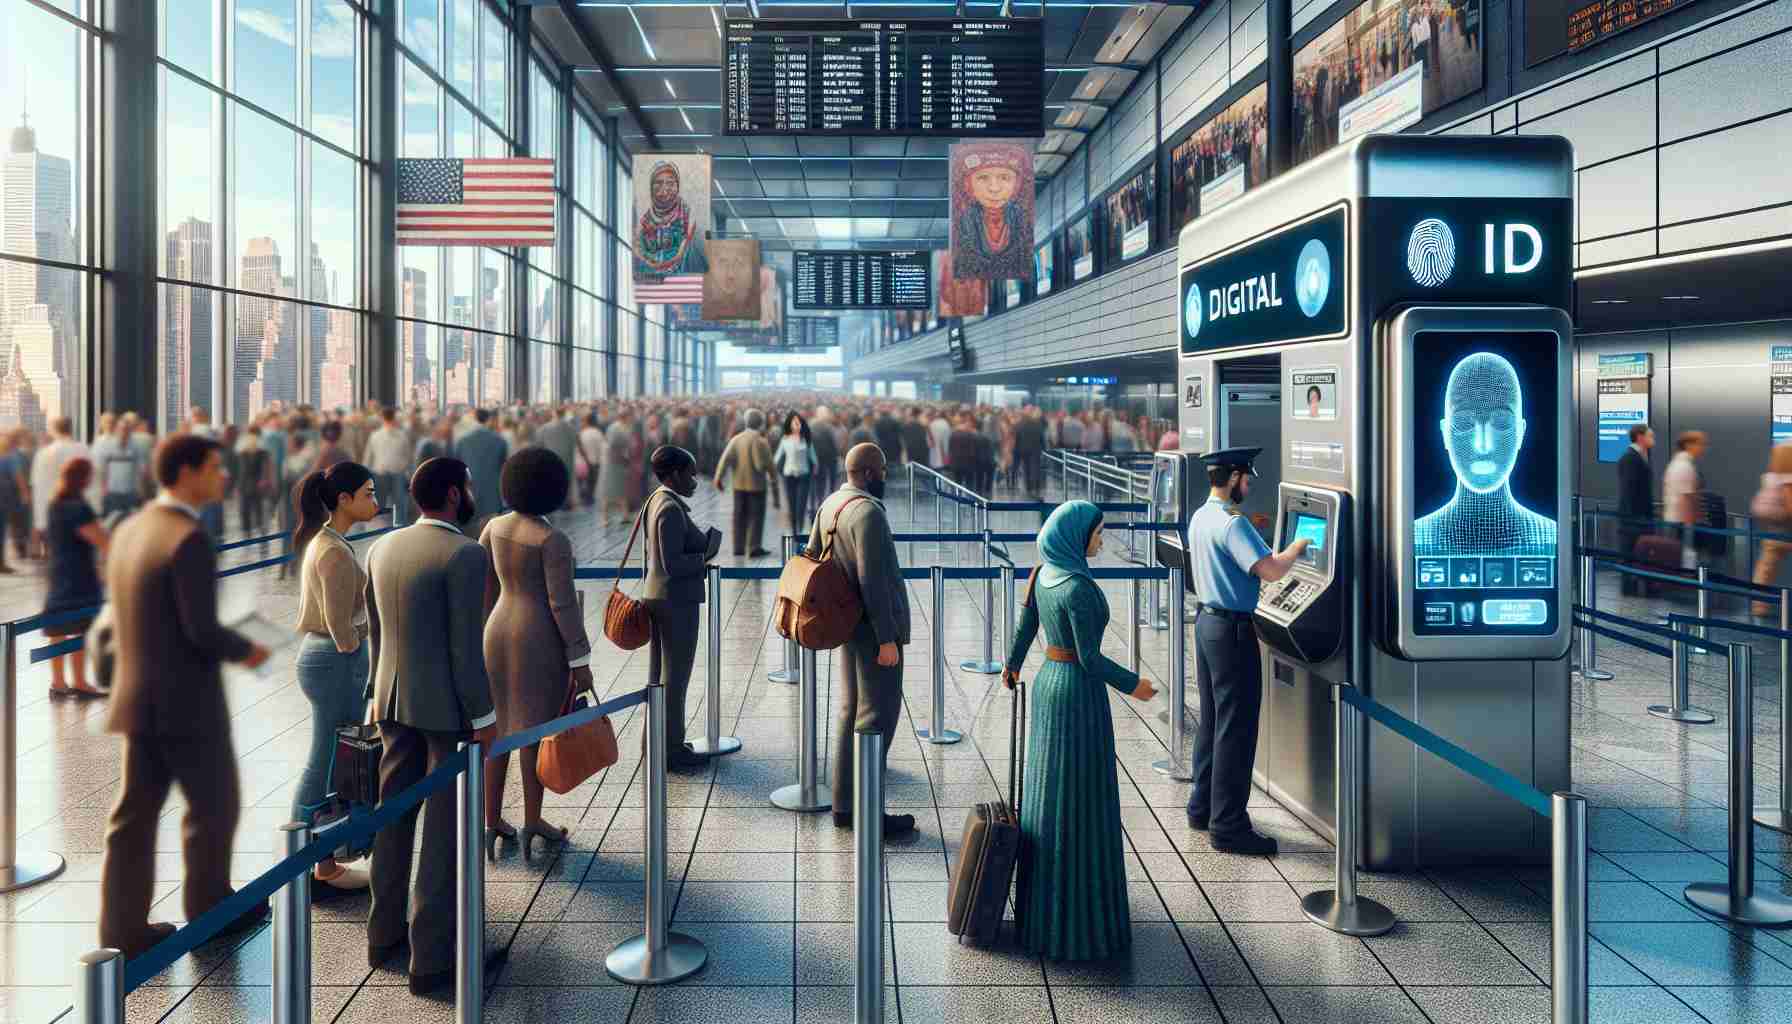 New York Introduces Digital ID for Streamlined Airport Checkpoints